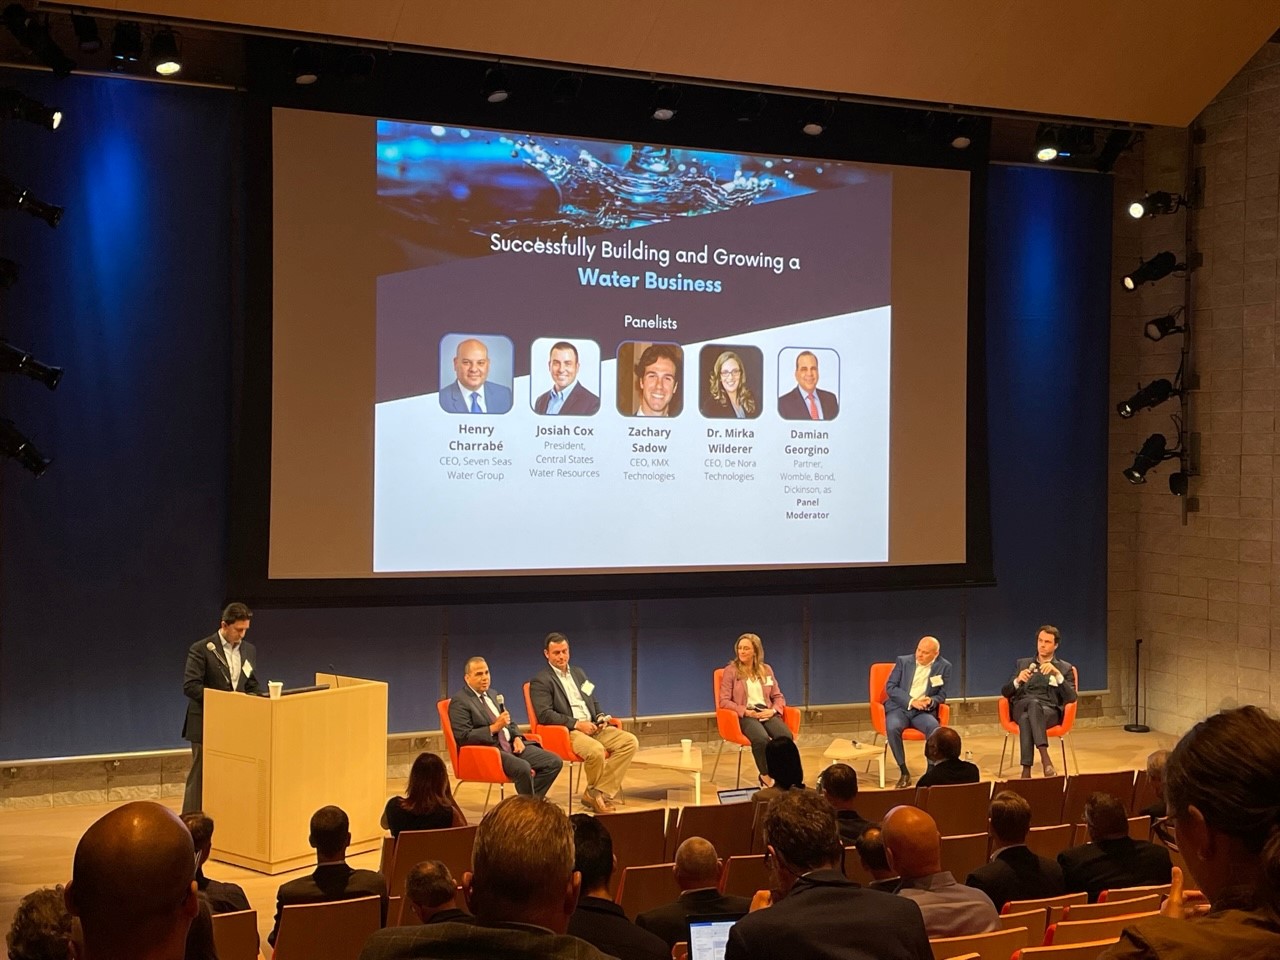 Damian Georgino moderates a panel discussion on “Successfully Building and Growing a Water Infrastructure Business” at the Sciens Capital Rethinking Water Conference.